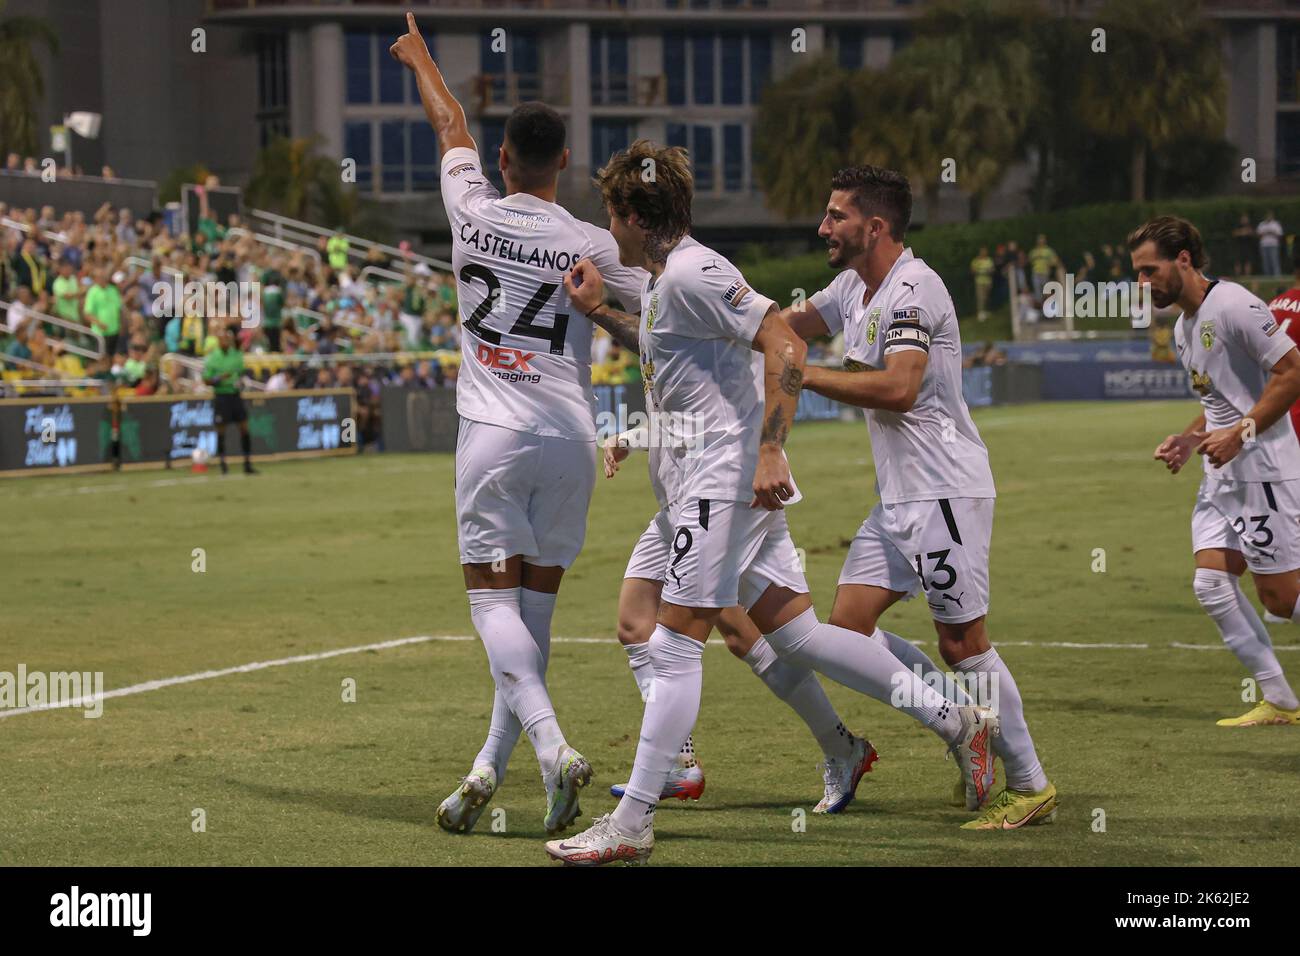 St. Petersburg, FL: Tampa Bay Rowdies defender Santi Castaneda (240 shows his excitement after scoring the first goal during a USL soccer game against Stock Photo